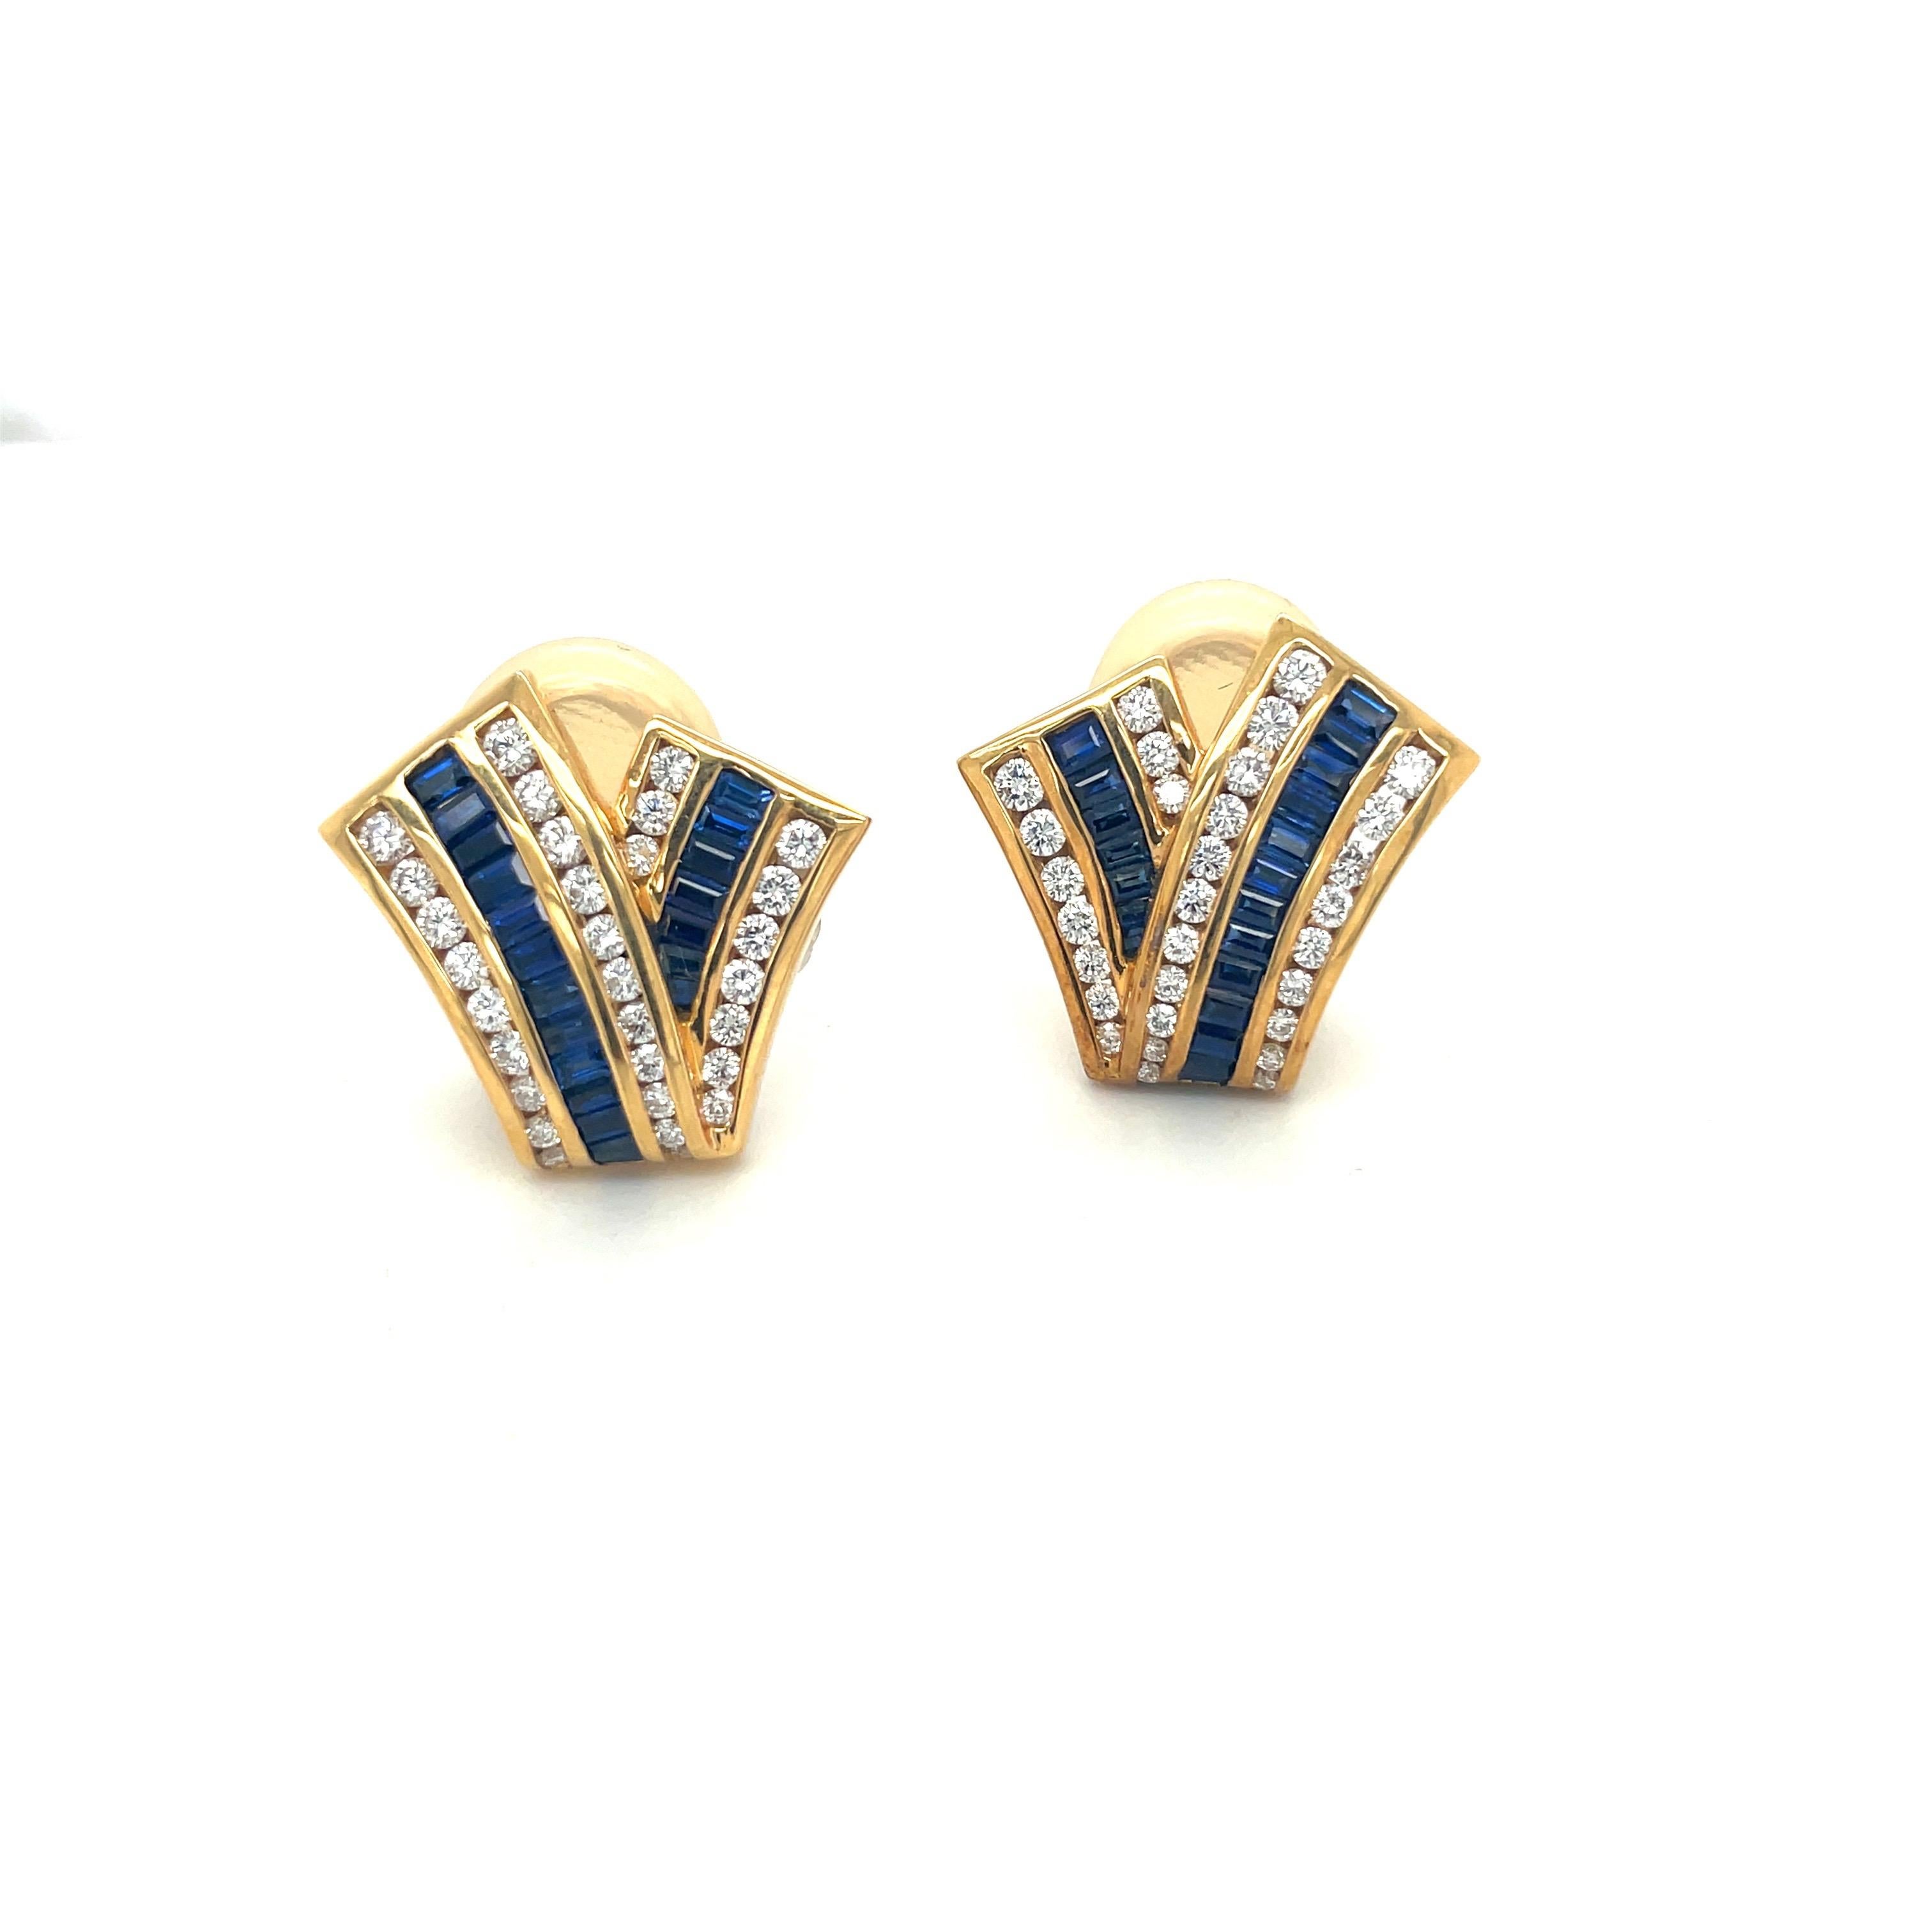 Charles Krypell 18KT Yellow Gold 1.97Ct Blue Sapphire 1.23Ct. Diamond Earrings In New Condition For Sale In New York, NY